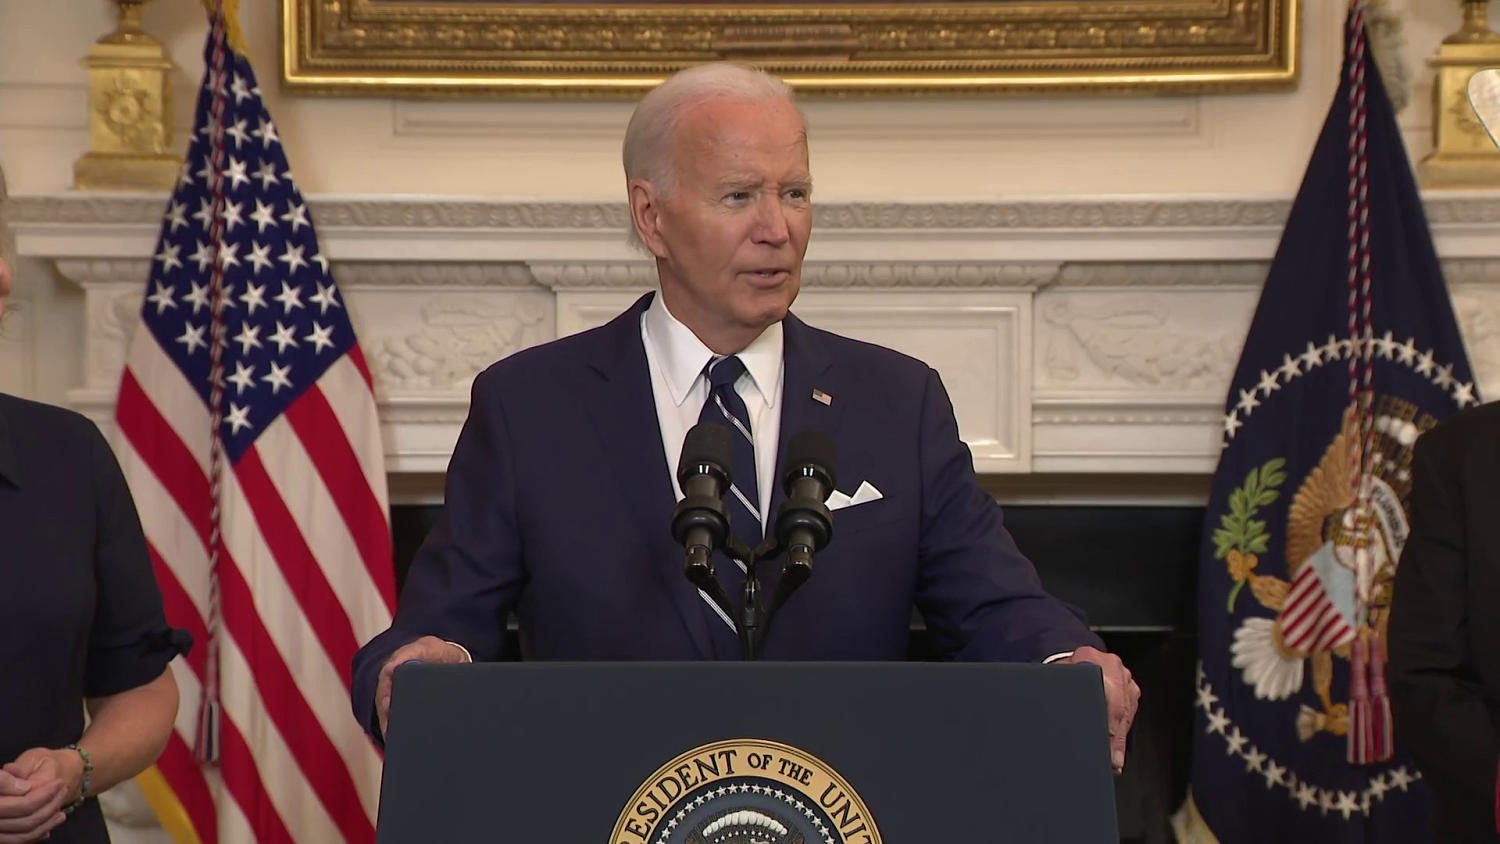 'They're free': Biden discusses release of Evan Gershkovich and Paul Whelan